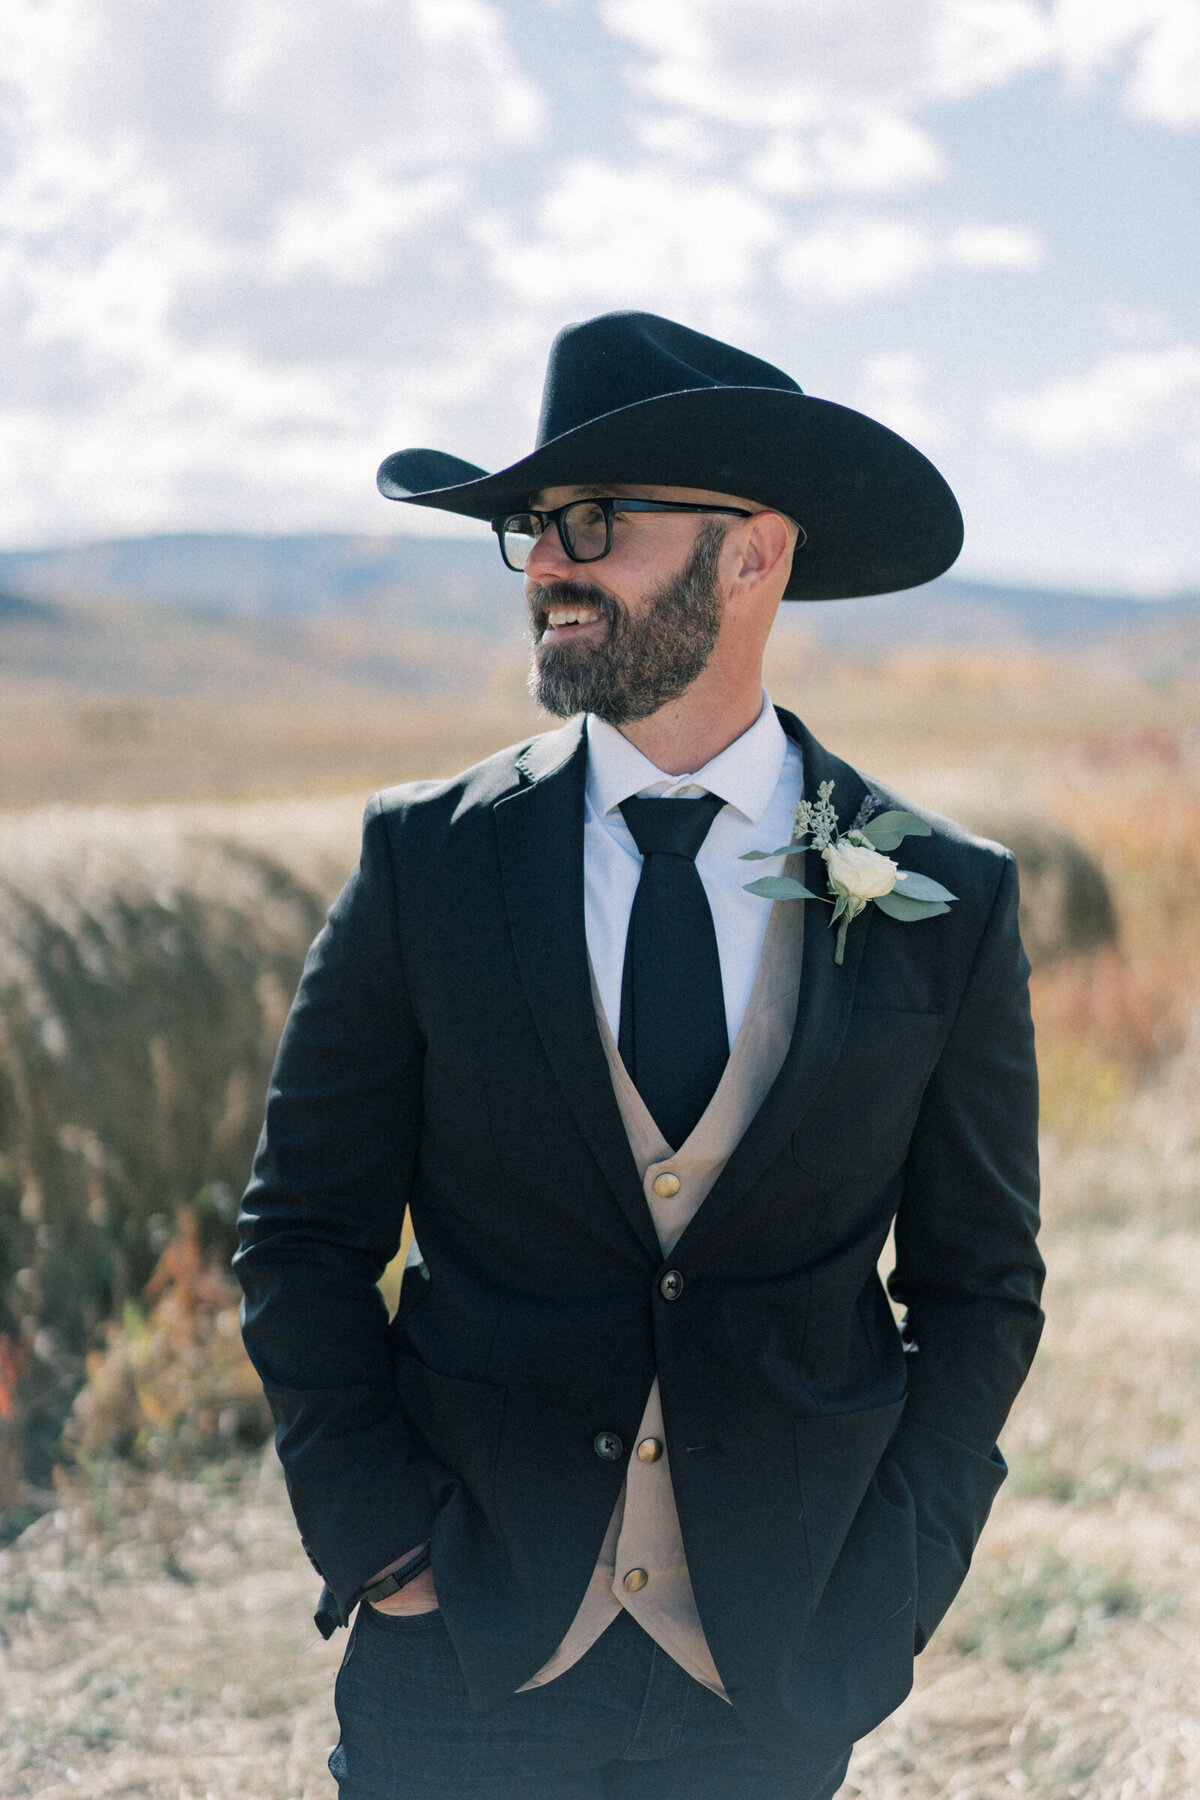 Steamboat_Springs_Ranch_wedding_Mary_Ann_craddock_photography_0016